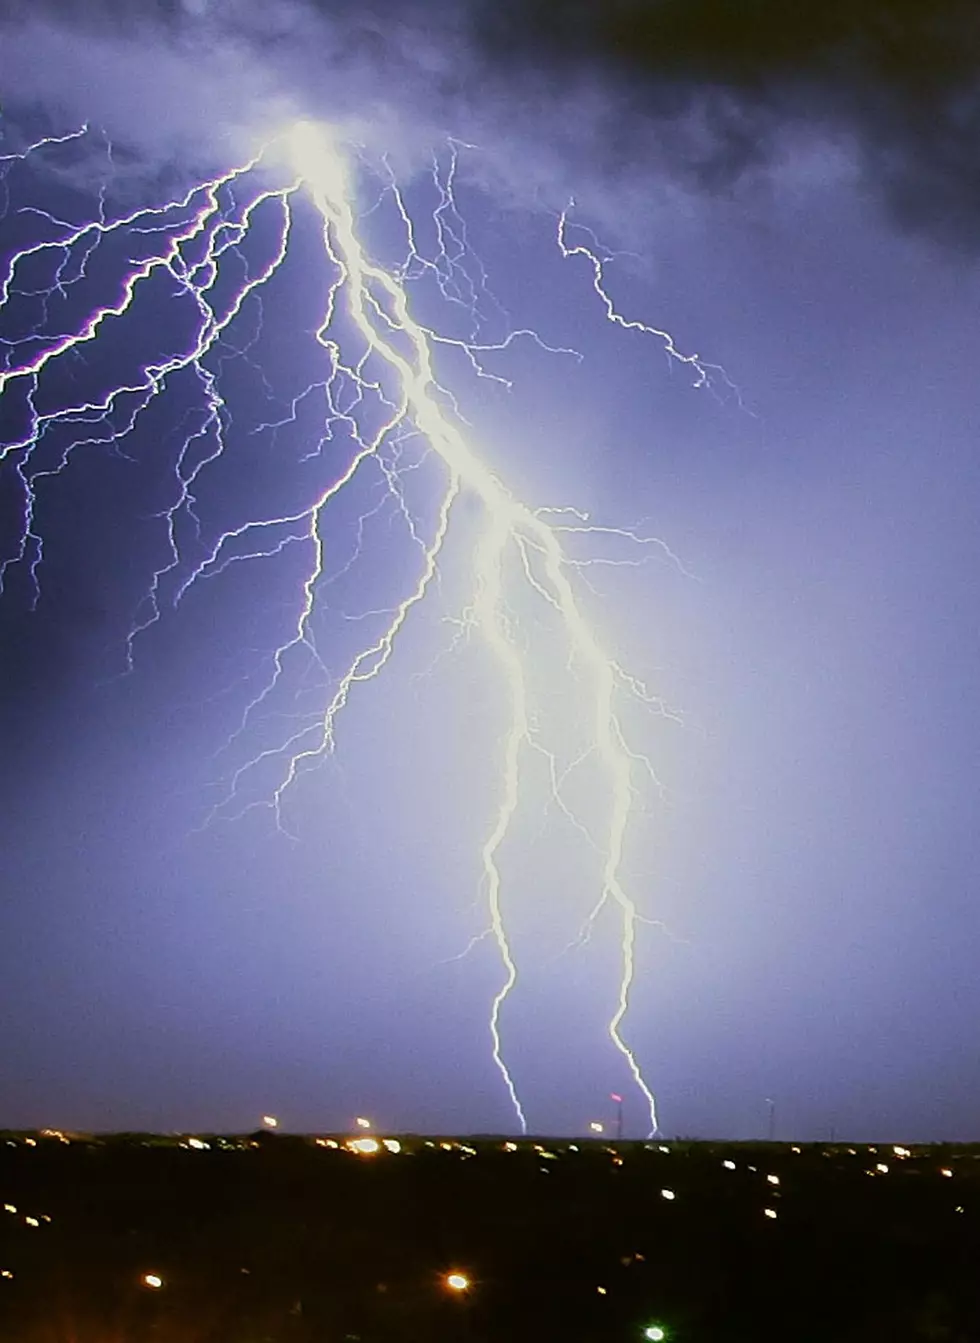 Free Beer &#038; Hot Wings: No One Wants to be This Close to a Lightning Strike [Video]